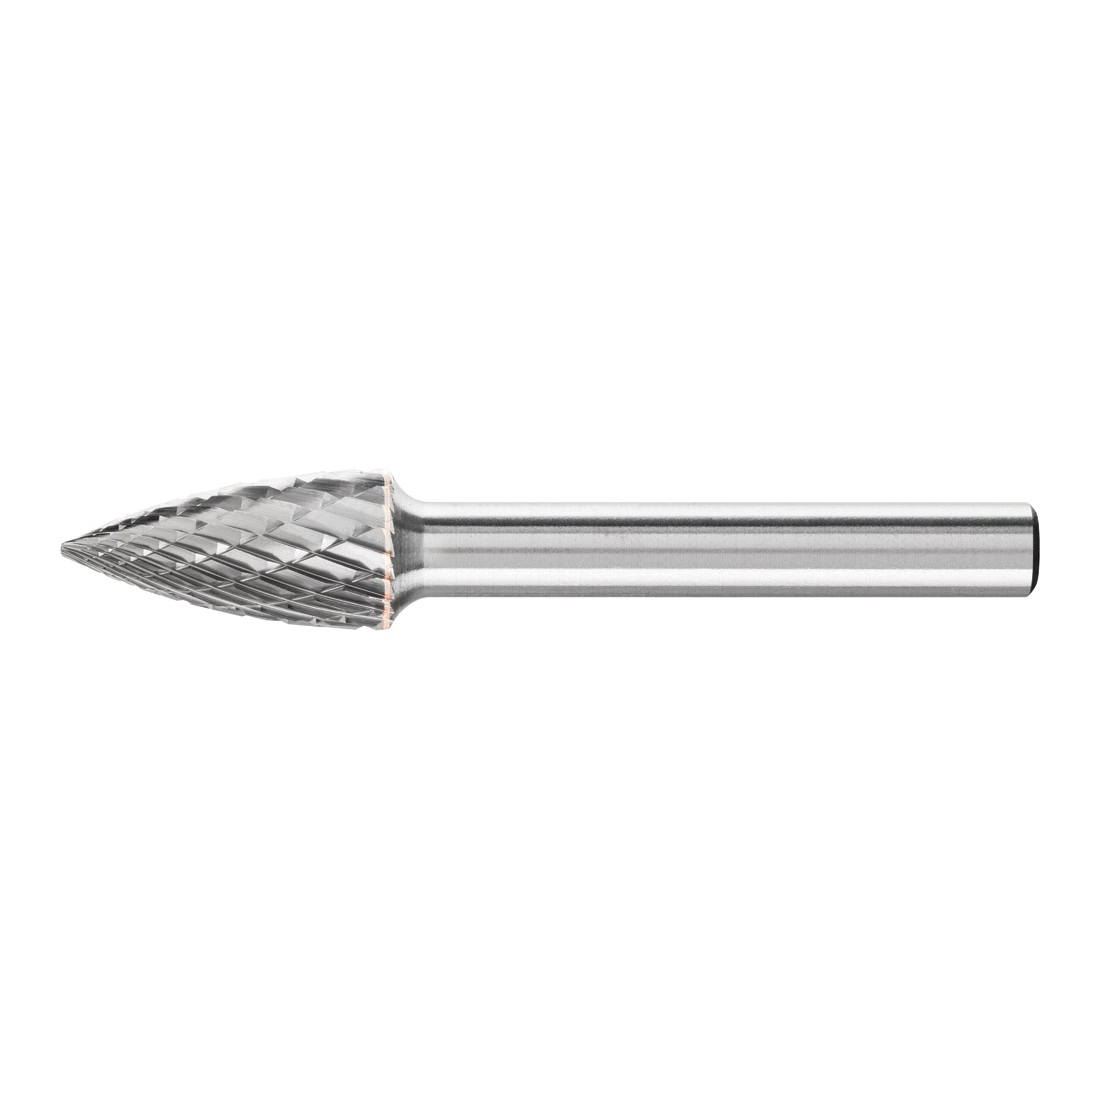 PFERD 24802 Universal Line Premium Grade Carbide Burr, Pointed End, Tree Pointed (Shape SG) Head, 3/8 in Dia Head, 3/4 in L of Cut, 2-1/2 in OAL, Double Cut Cut